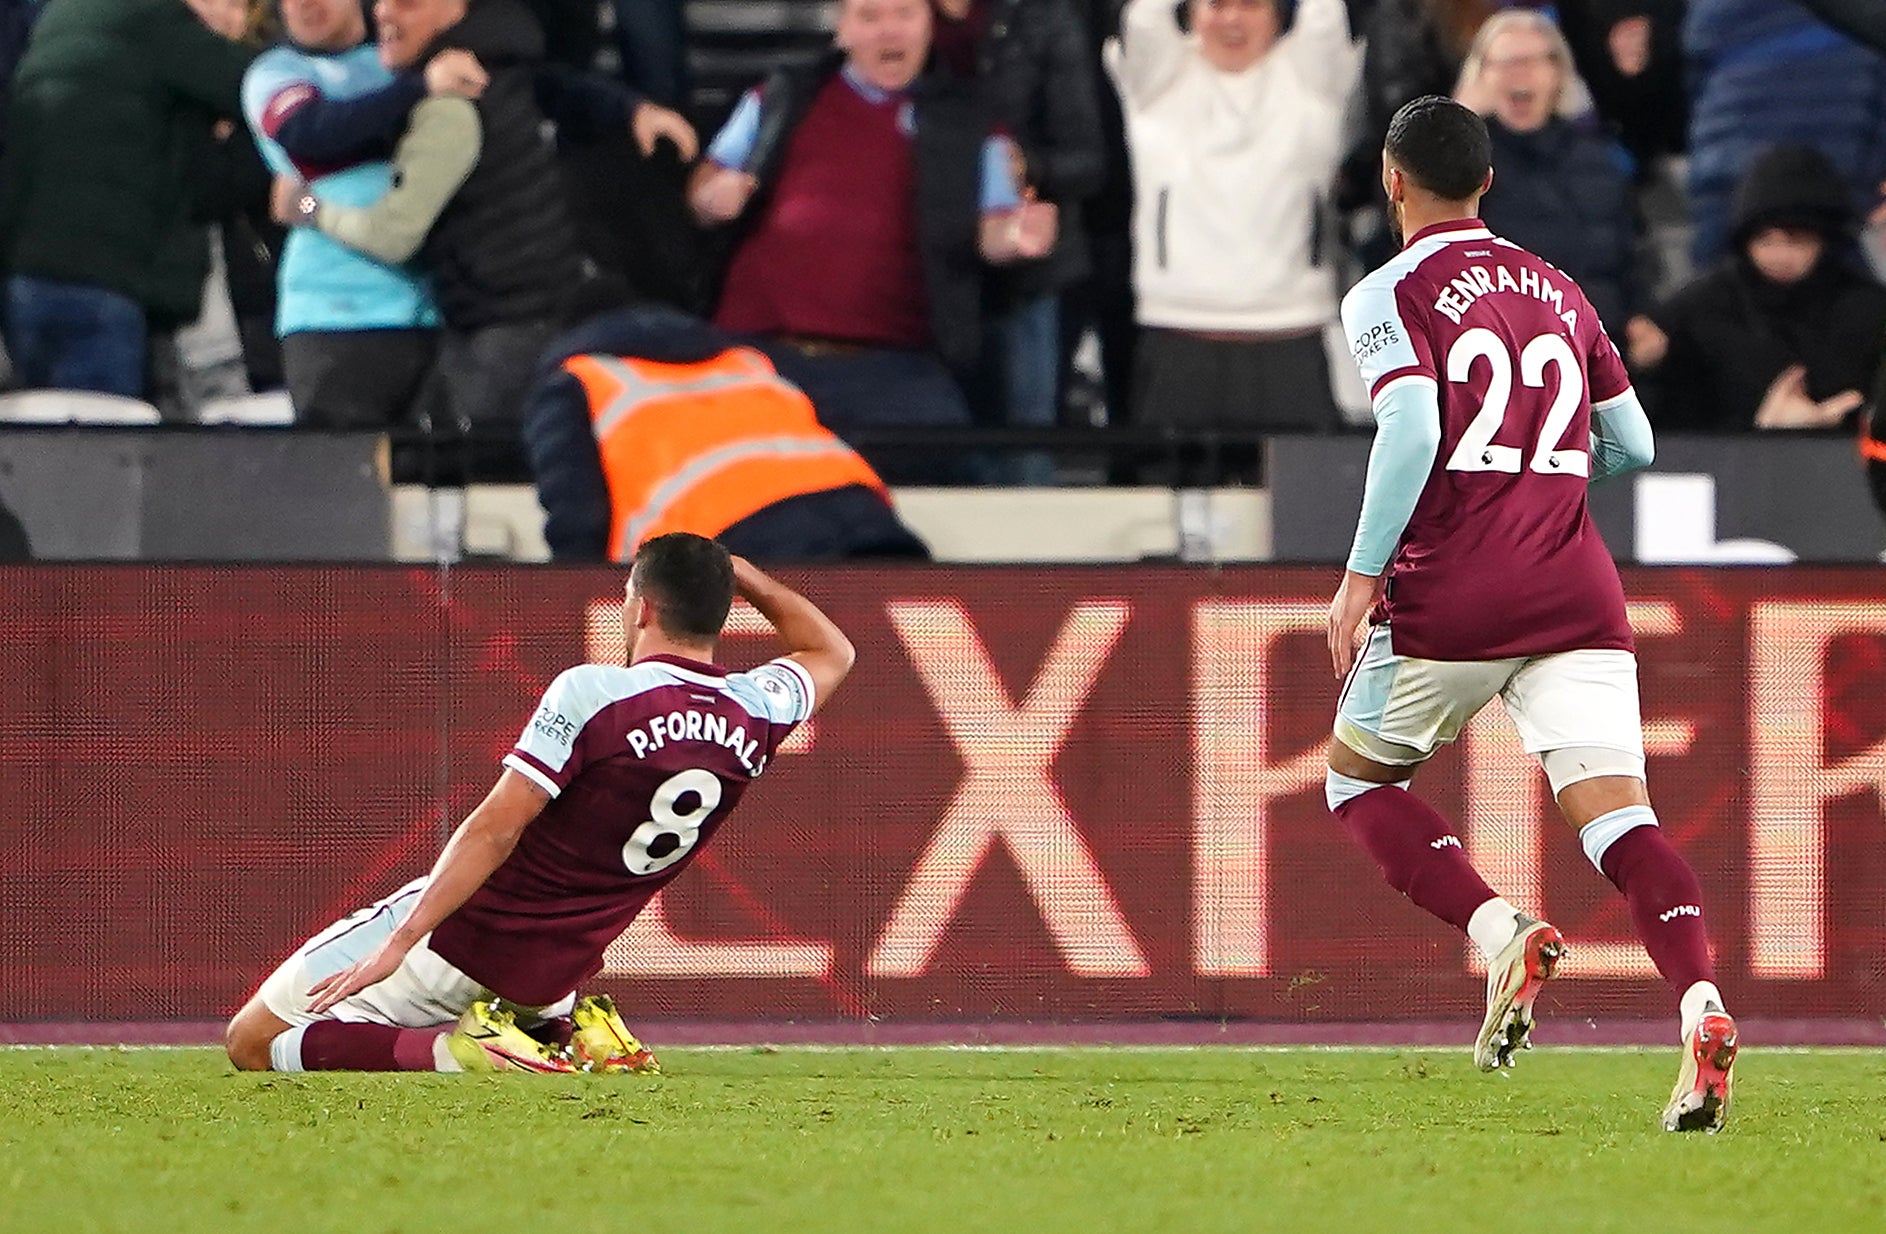 The Hammers secured a memorable 3-2 win over Liverpool on Sunday